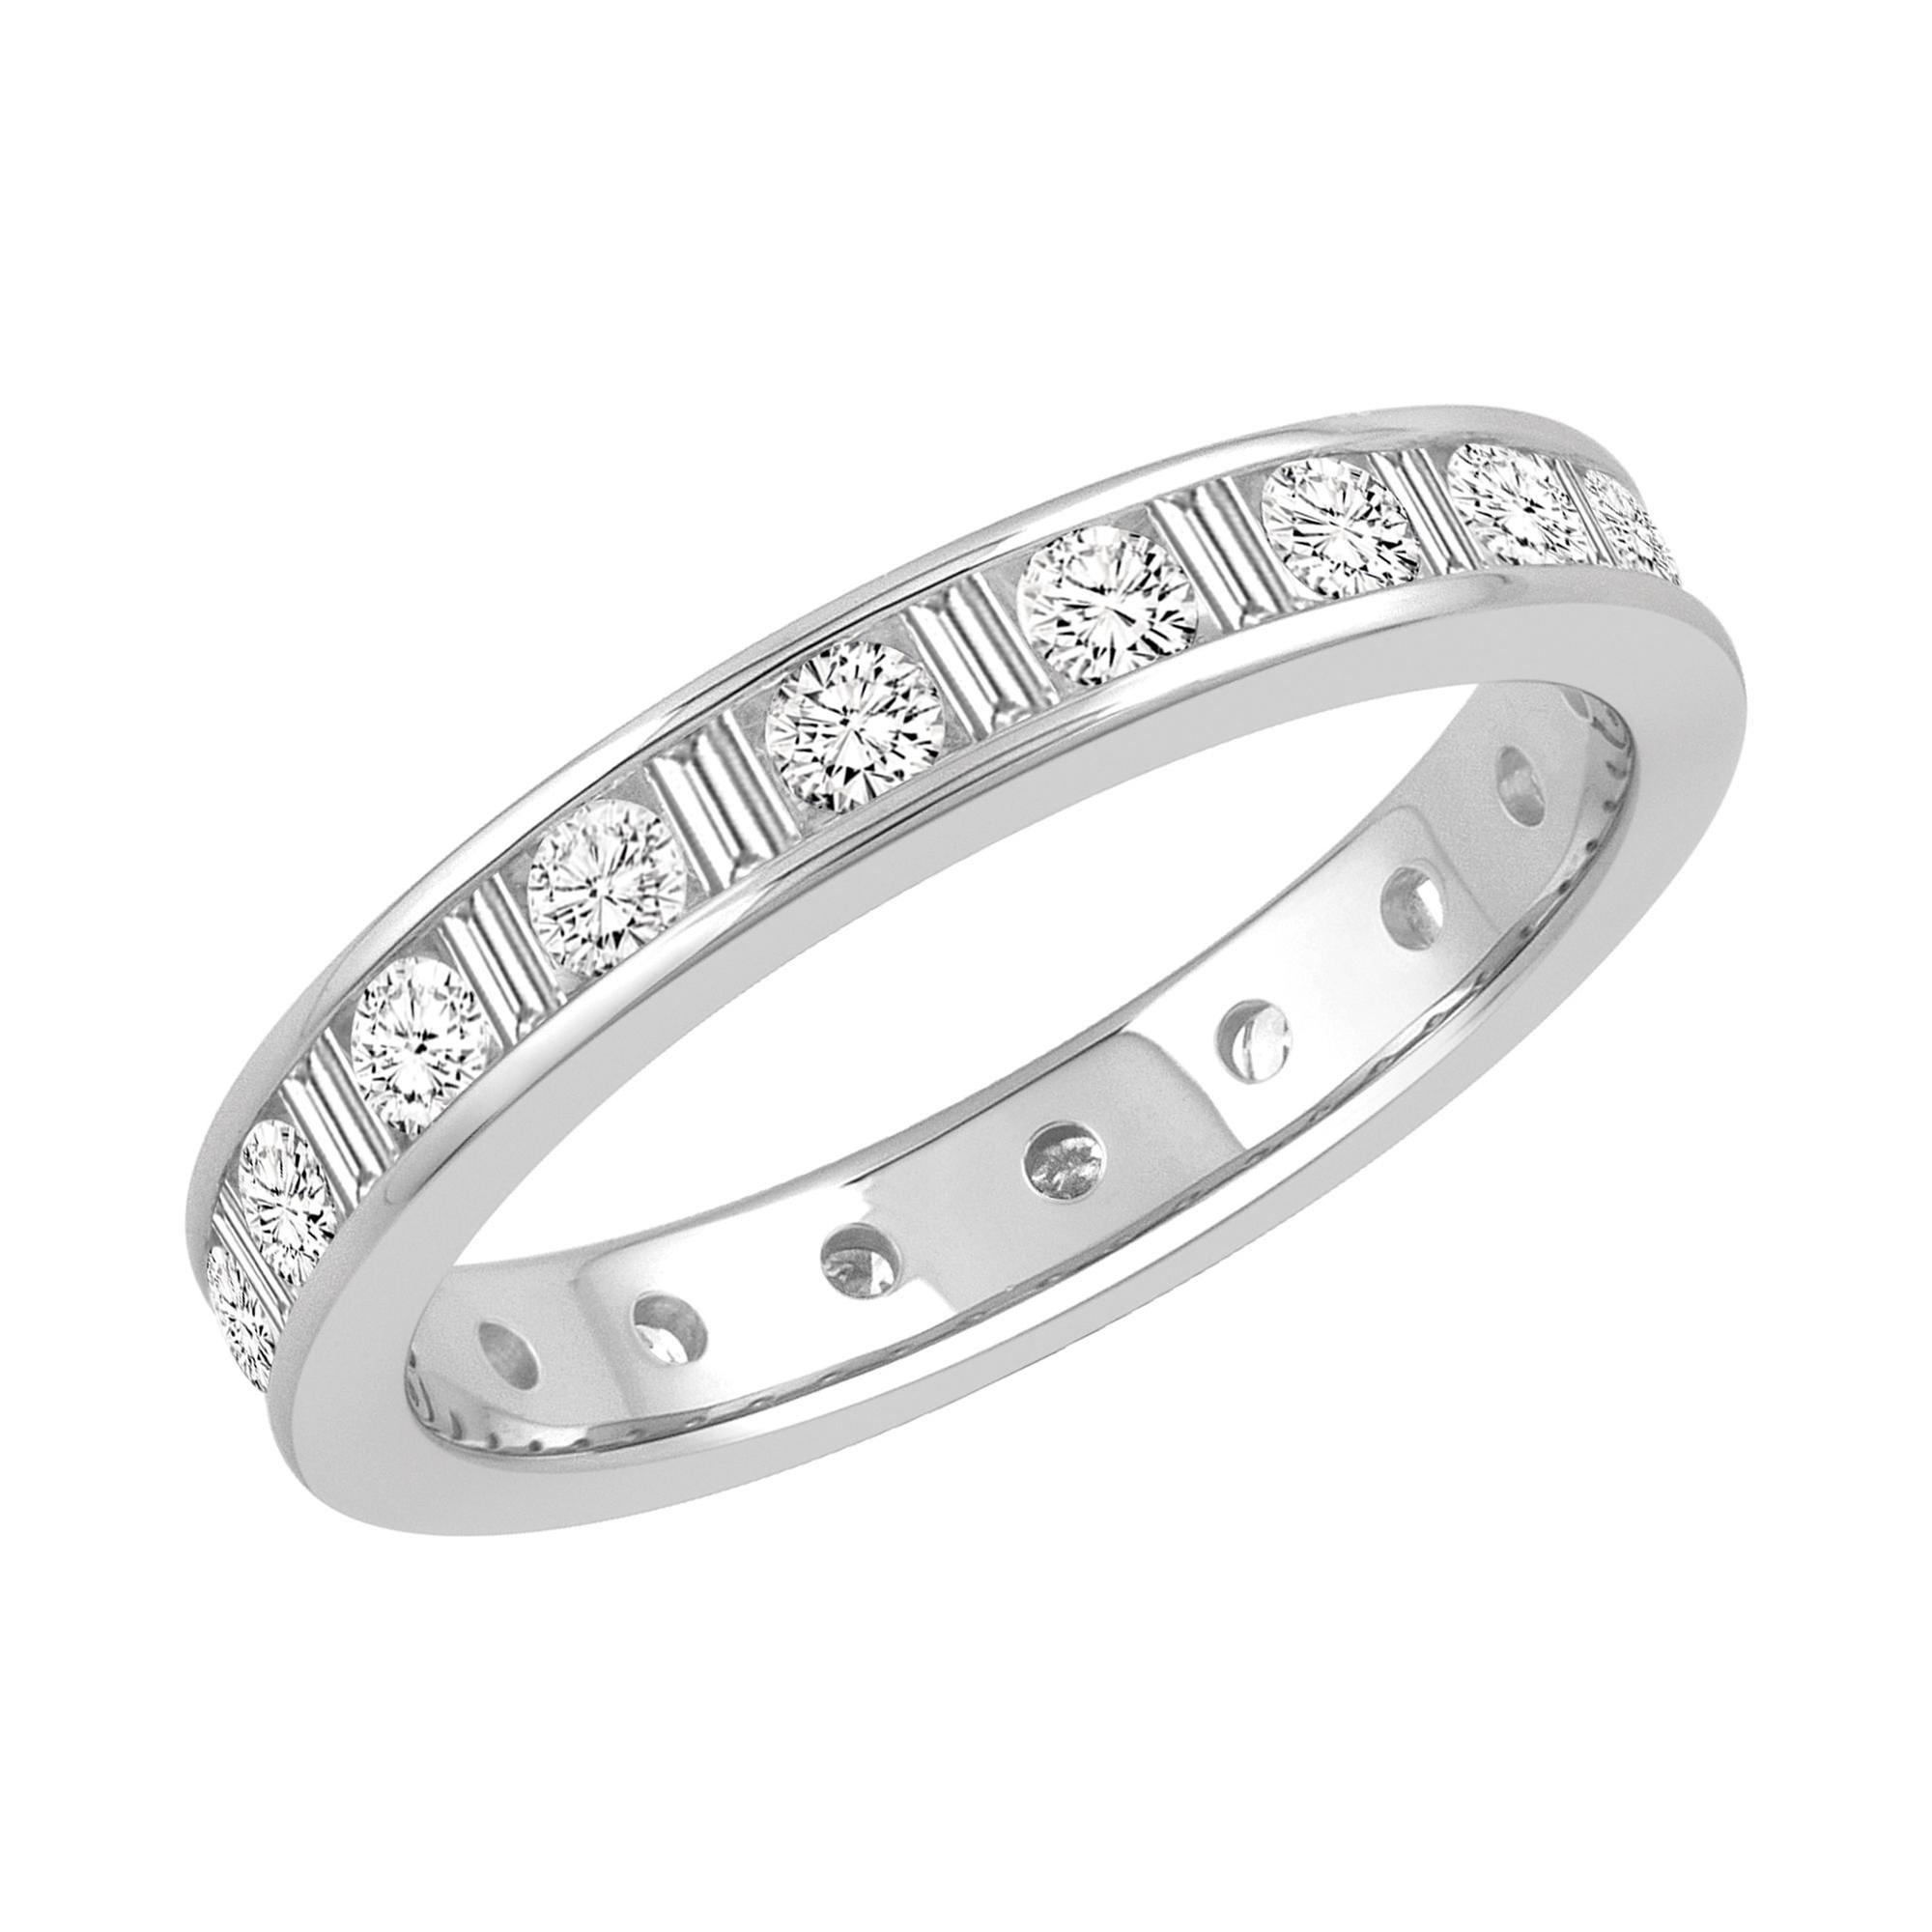 White Gold Channel Set Round and Baguette Diamond Eternity Band 1ctw